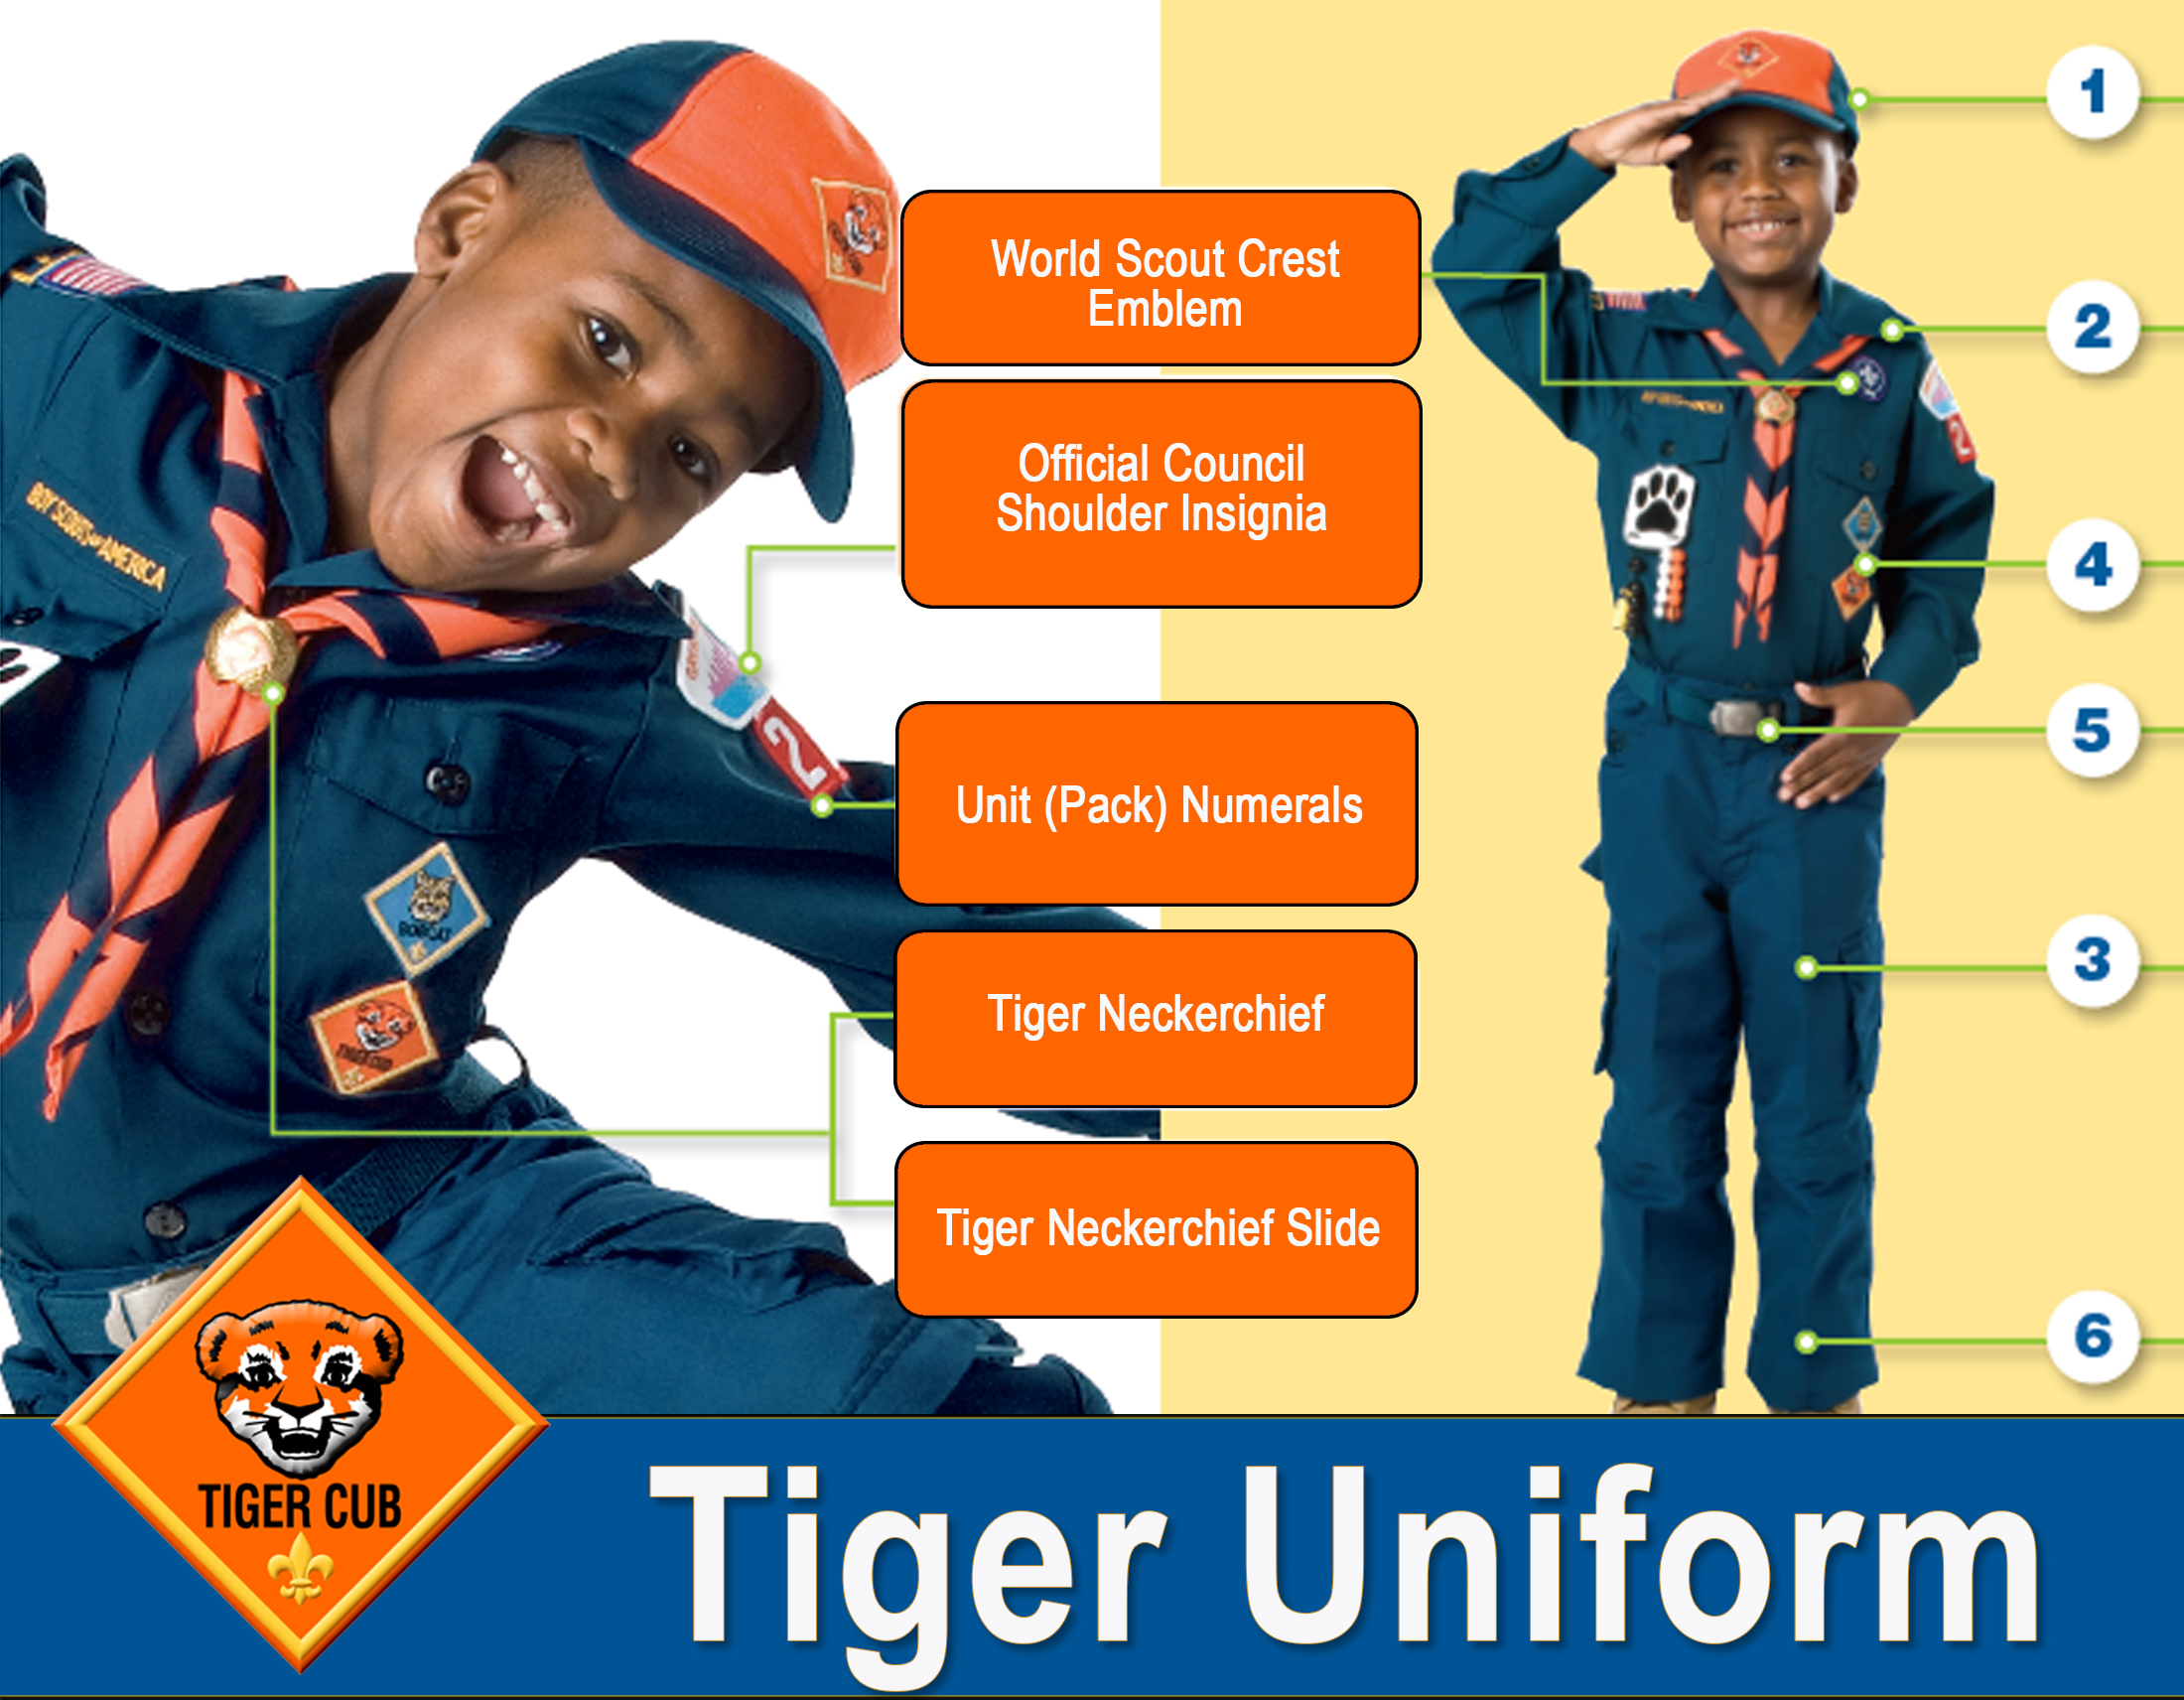 Where To Buy Cub Scout Uniform 66